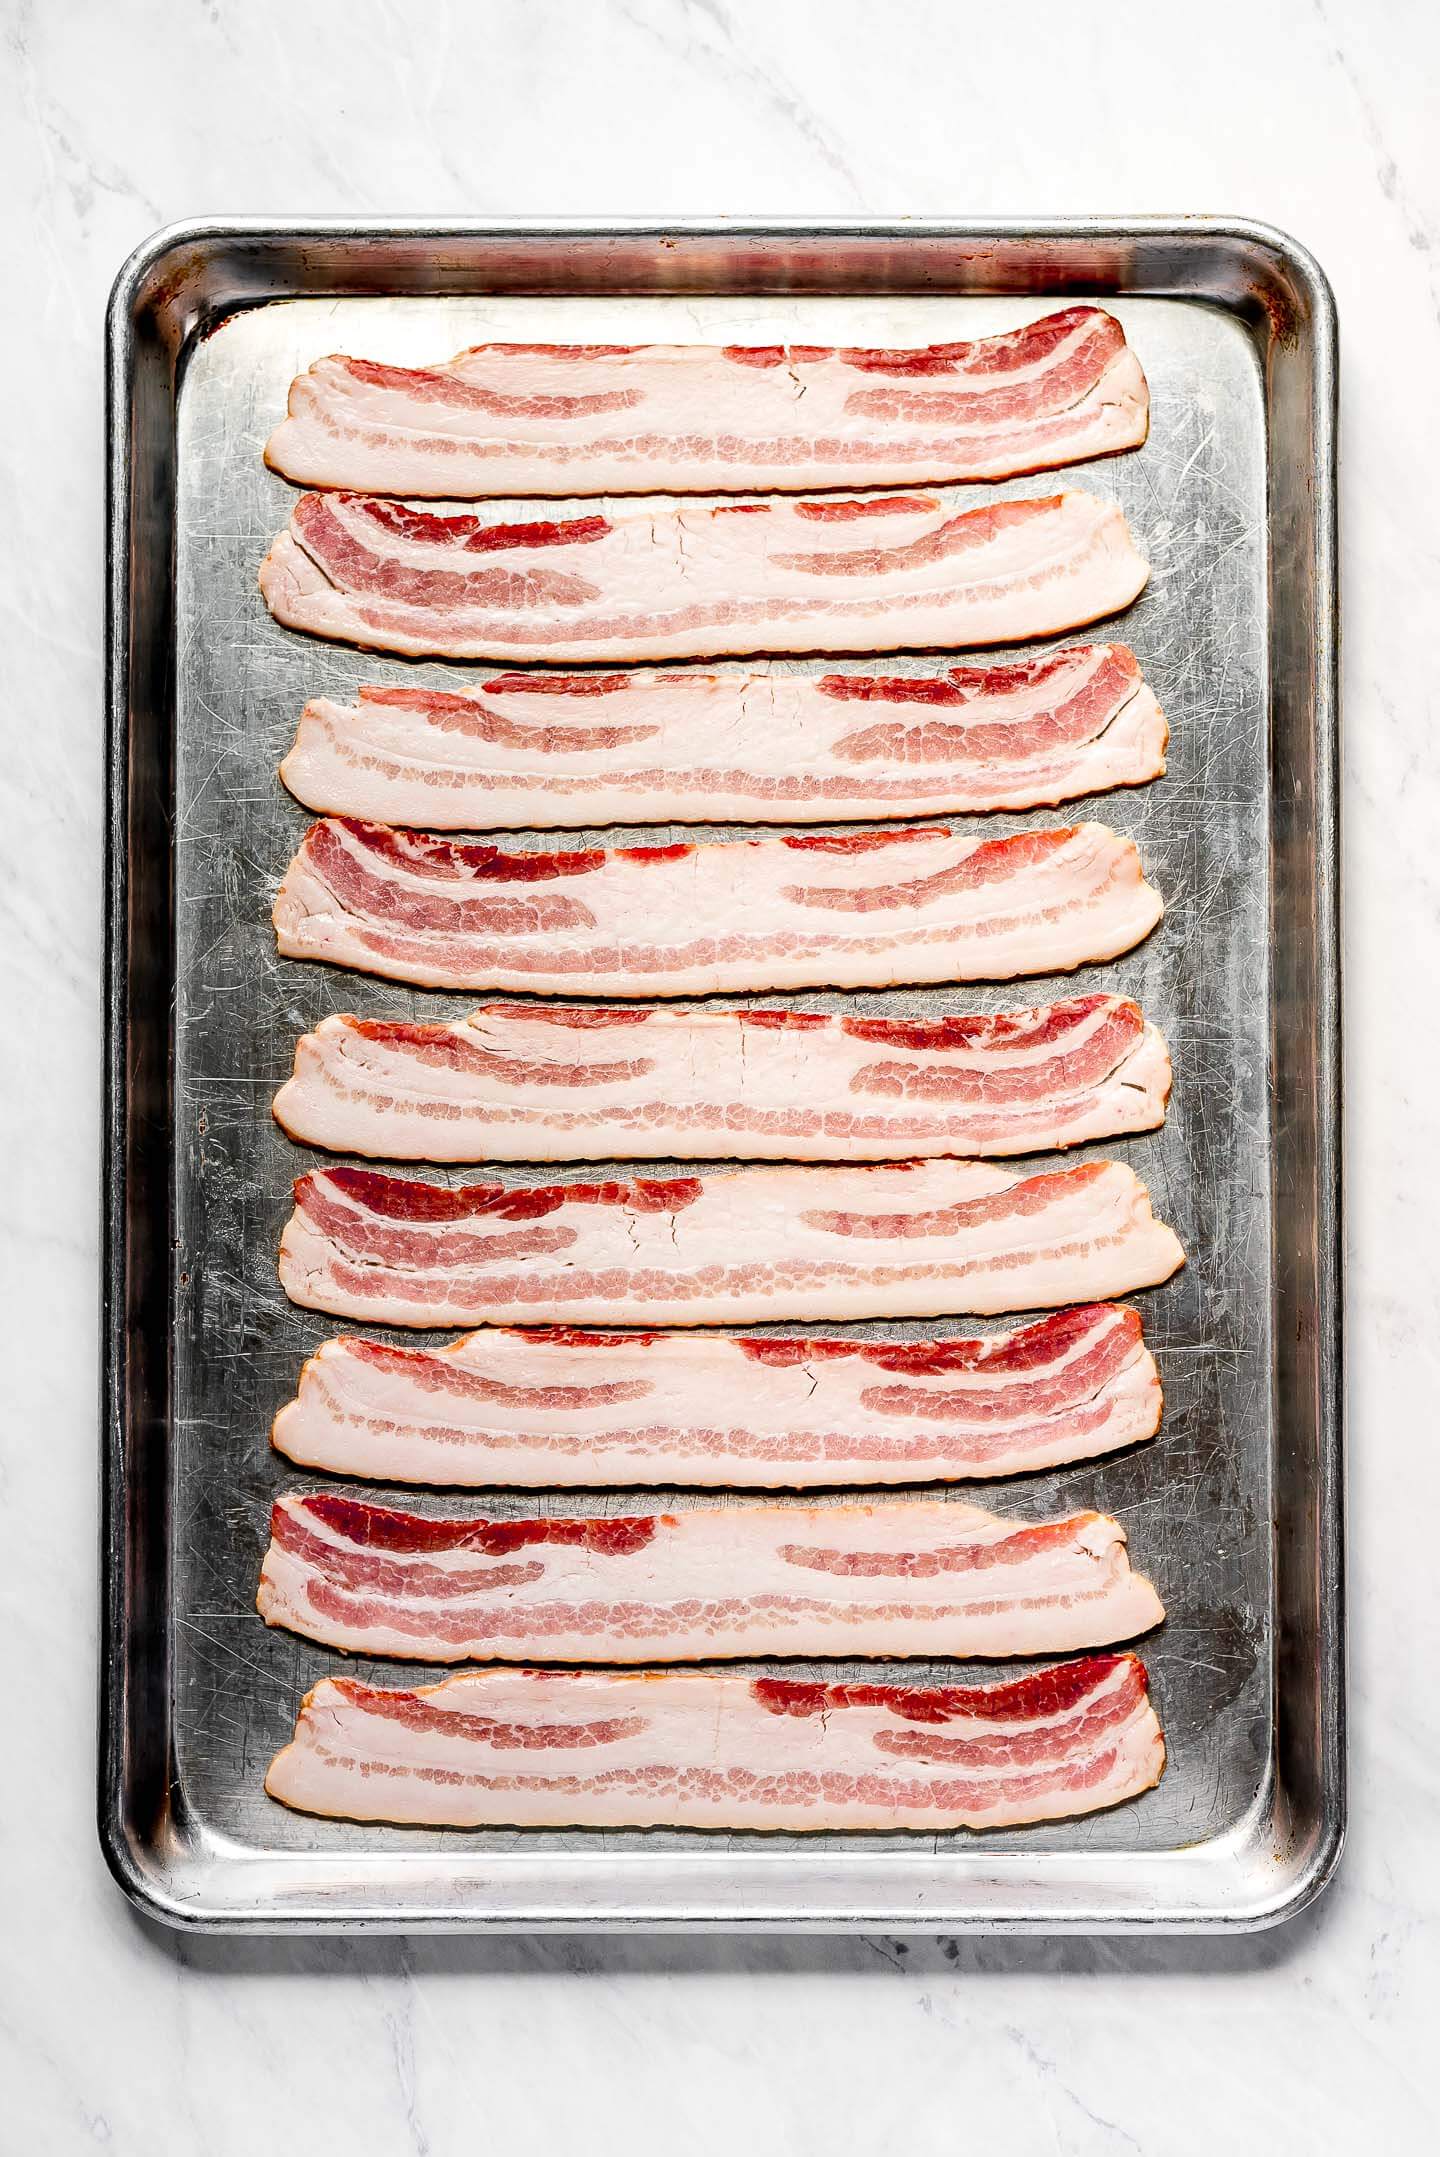 How to Bake Bacon in the Oven - Garnish & Glaze